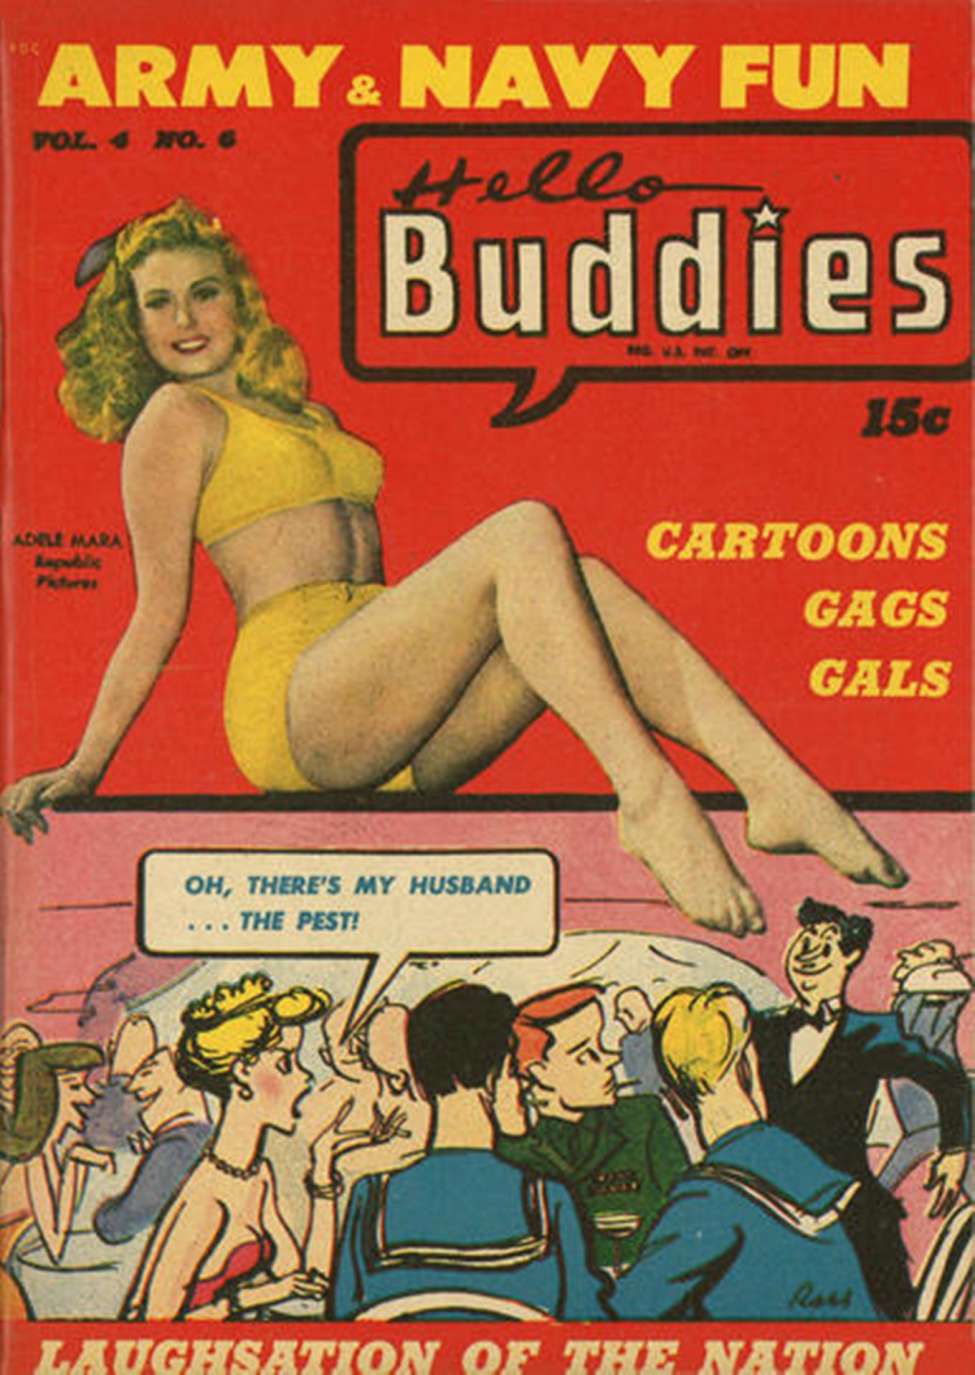 Book Cover For Hello Buddies 26 (v4 6)